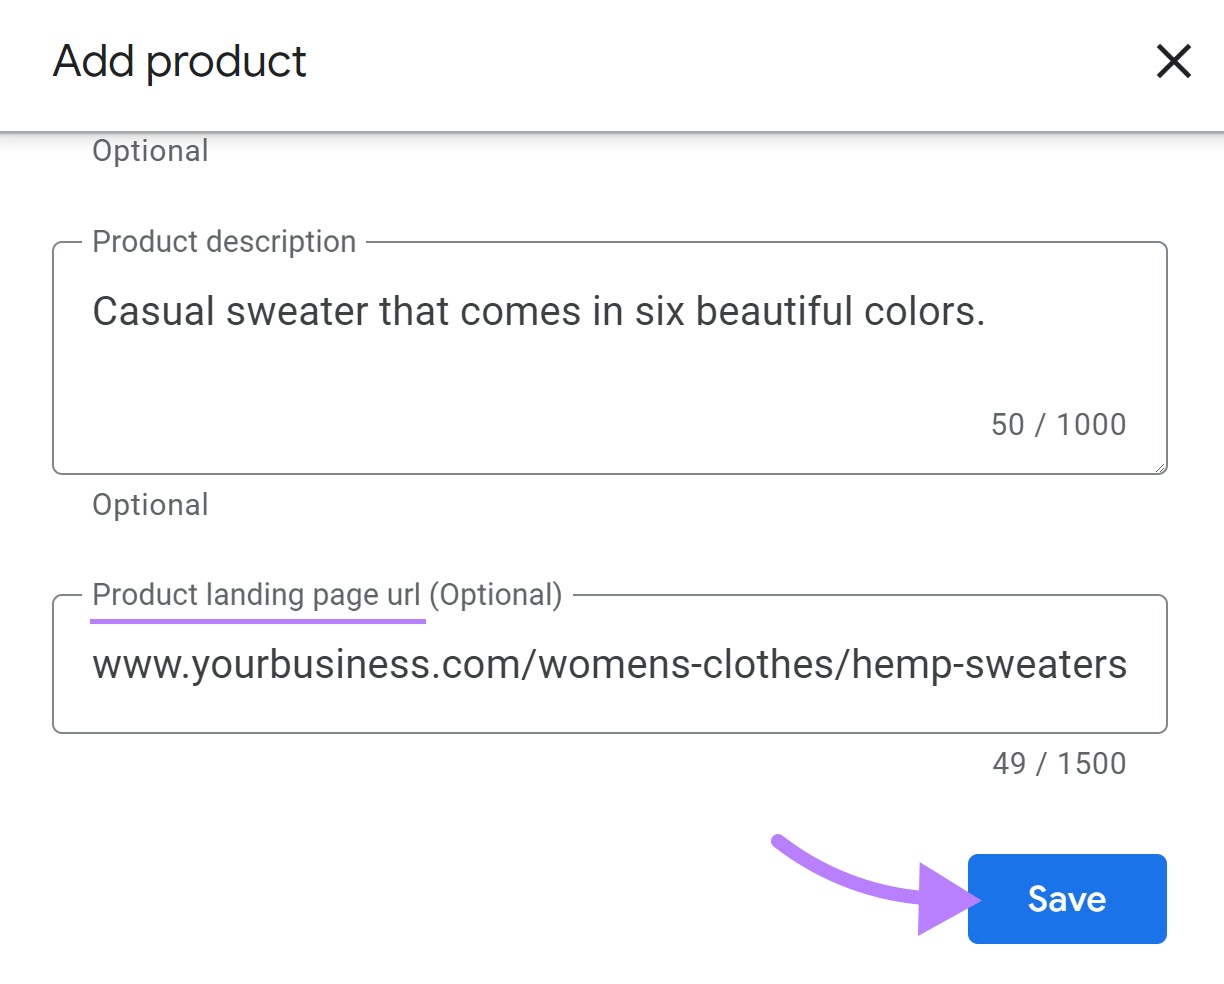 Adding your product to Google My Business